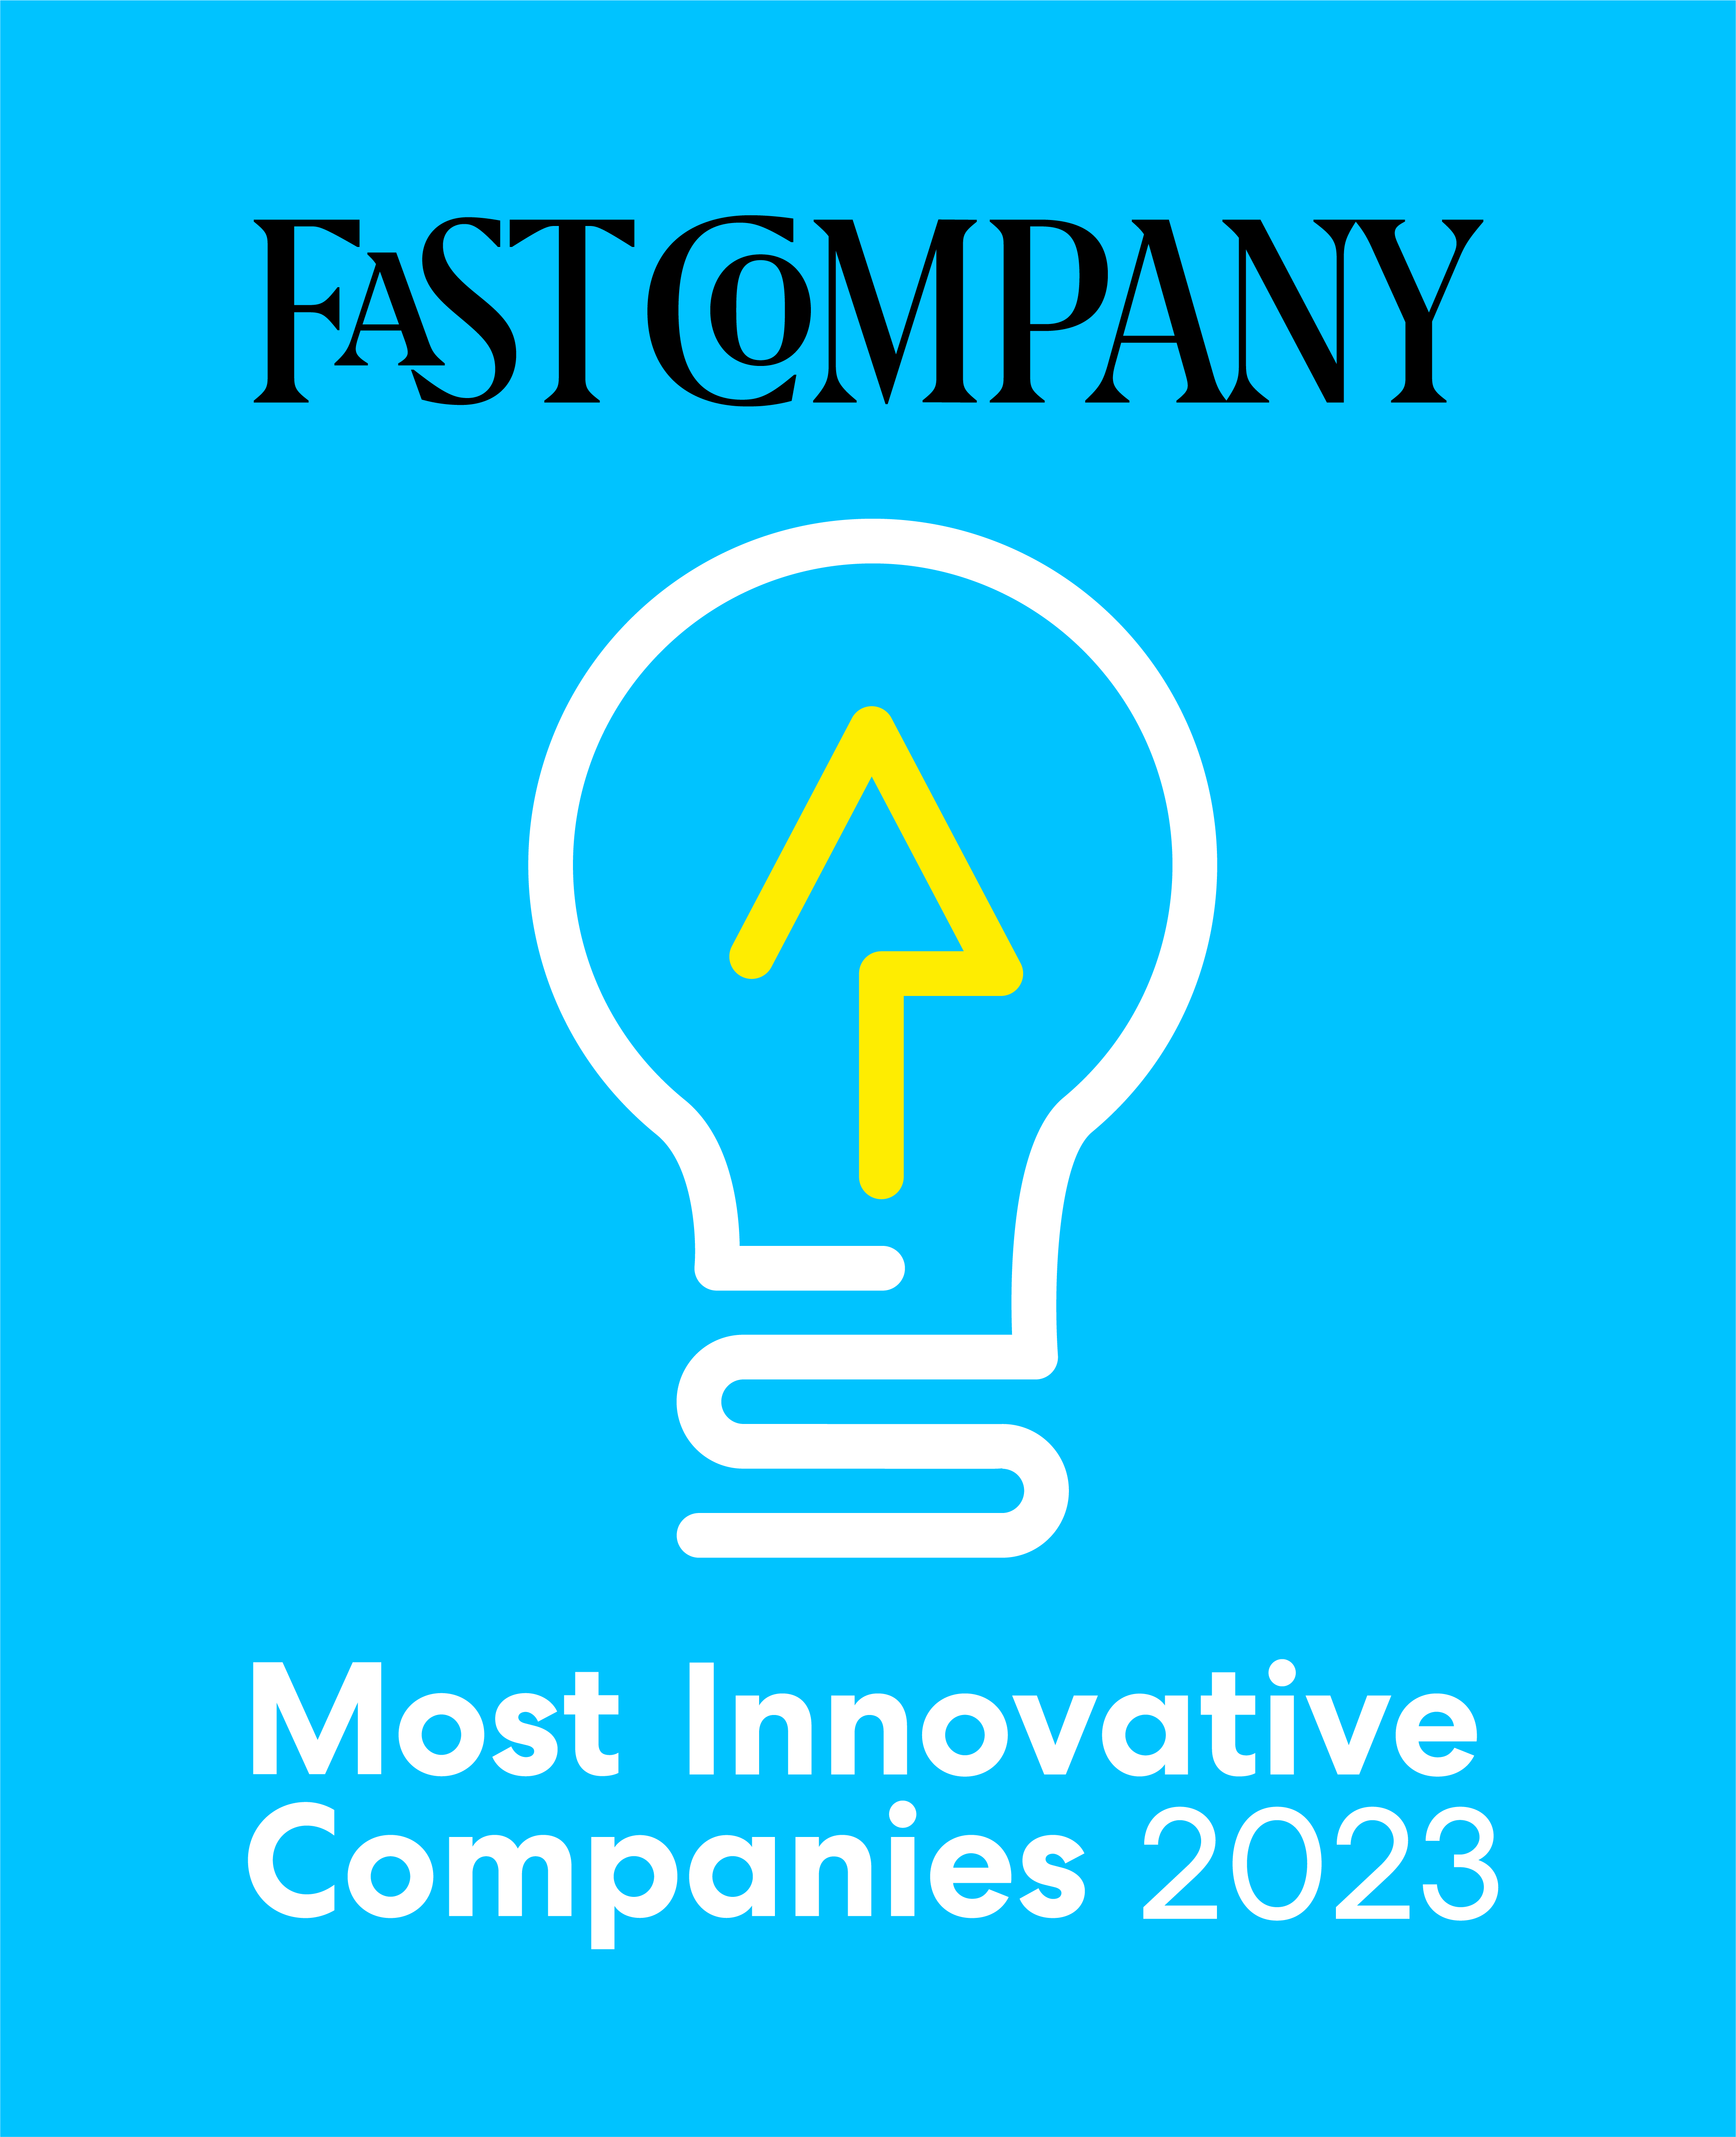 tonies® Named To Fast Company's World's Most Innovative Companies 2021 List